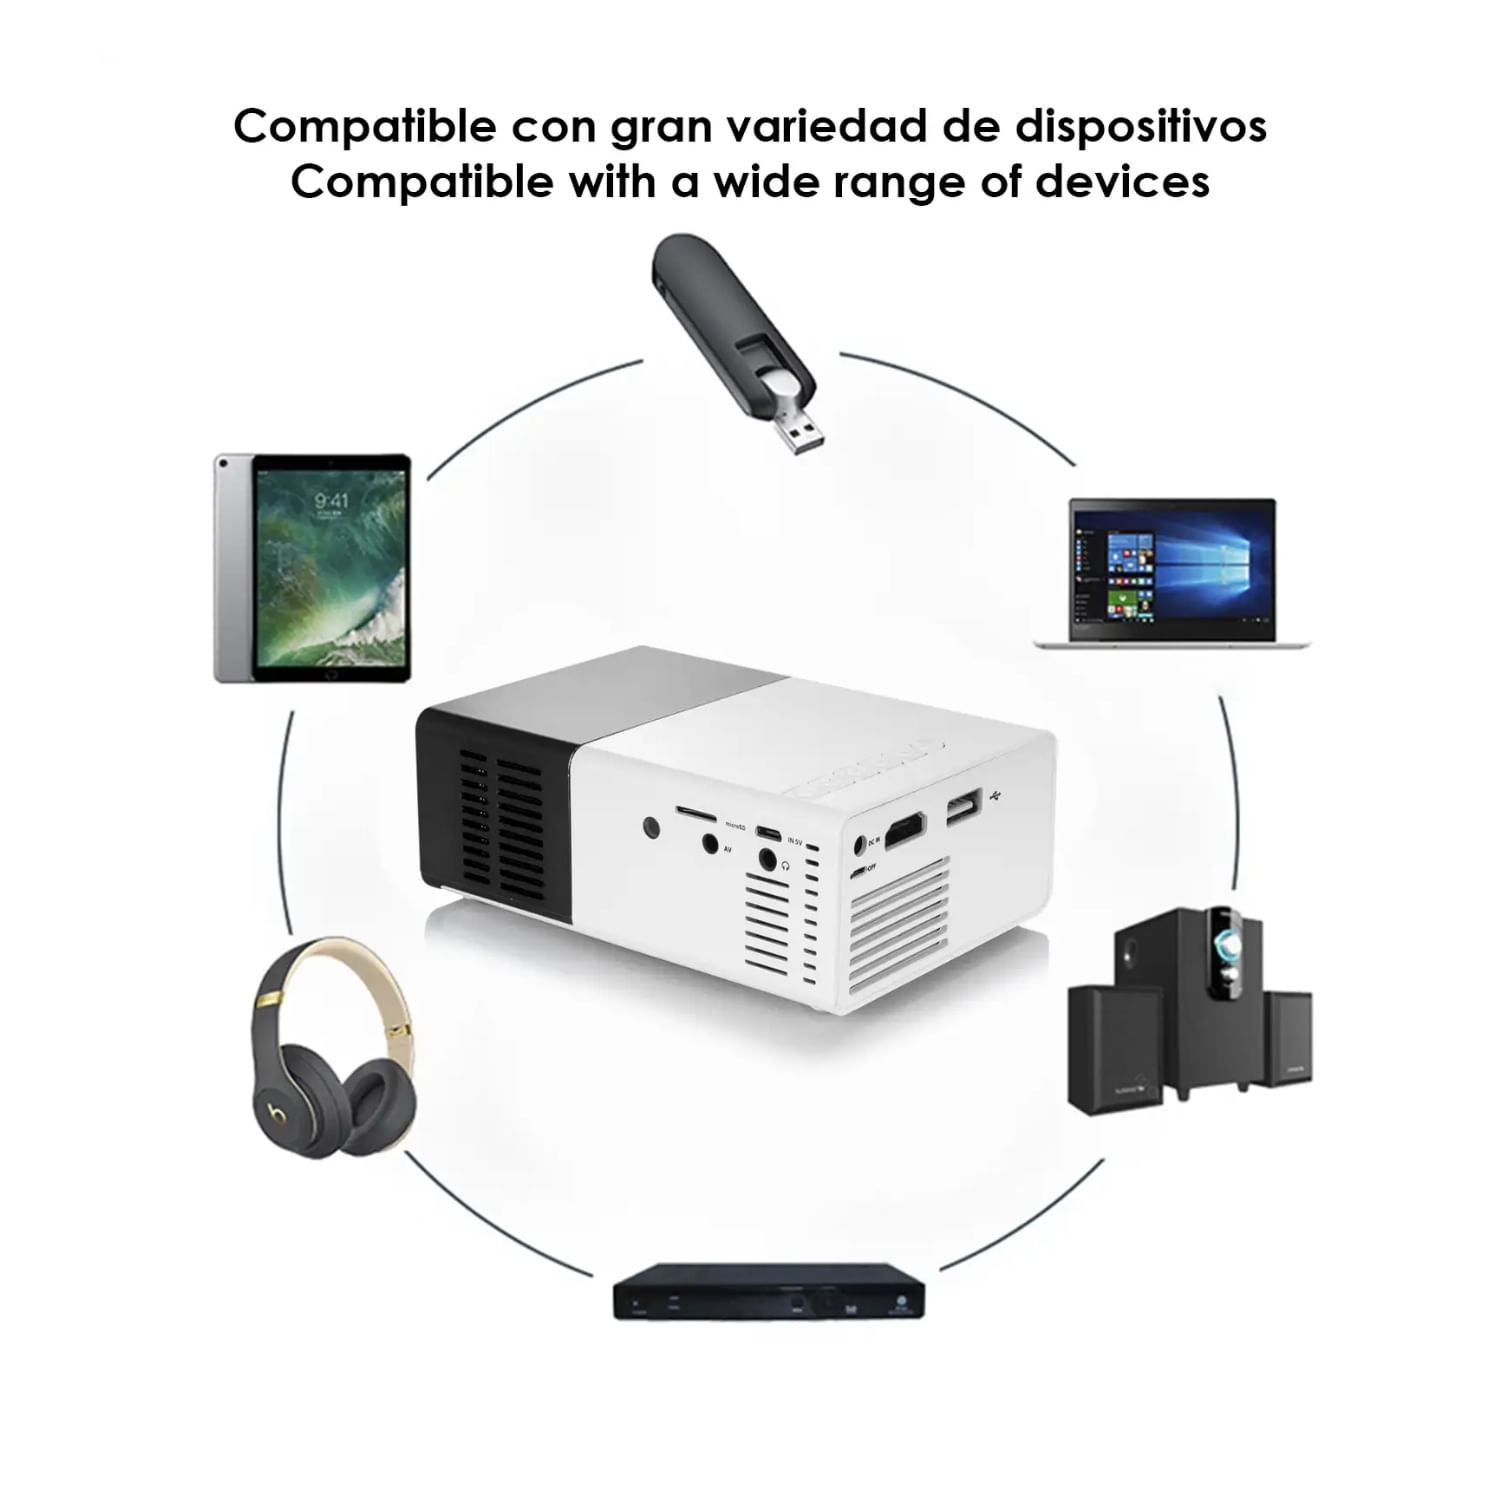 PROYECTOR HY300  Virtual Business Cusco